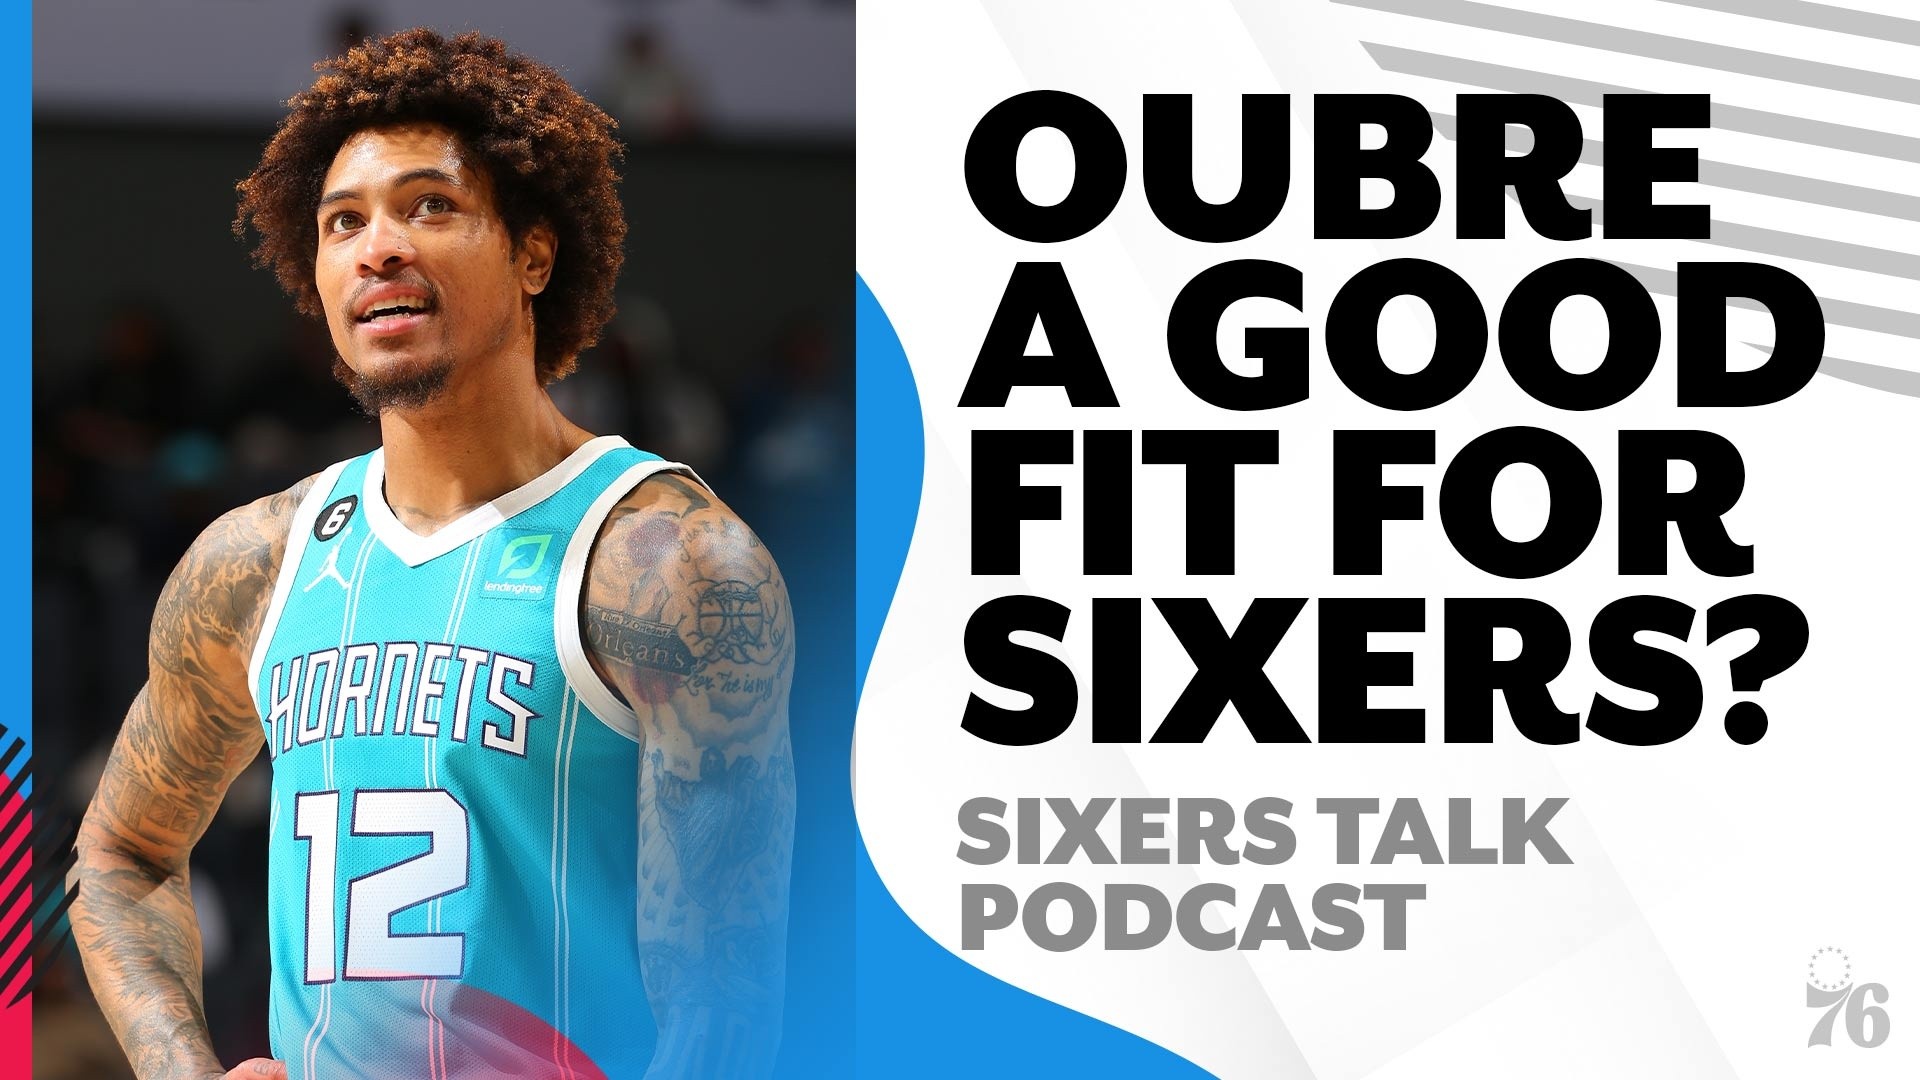 Meet the Newest Sixer: Kelly Oubre Jr.